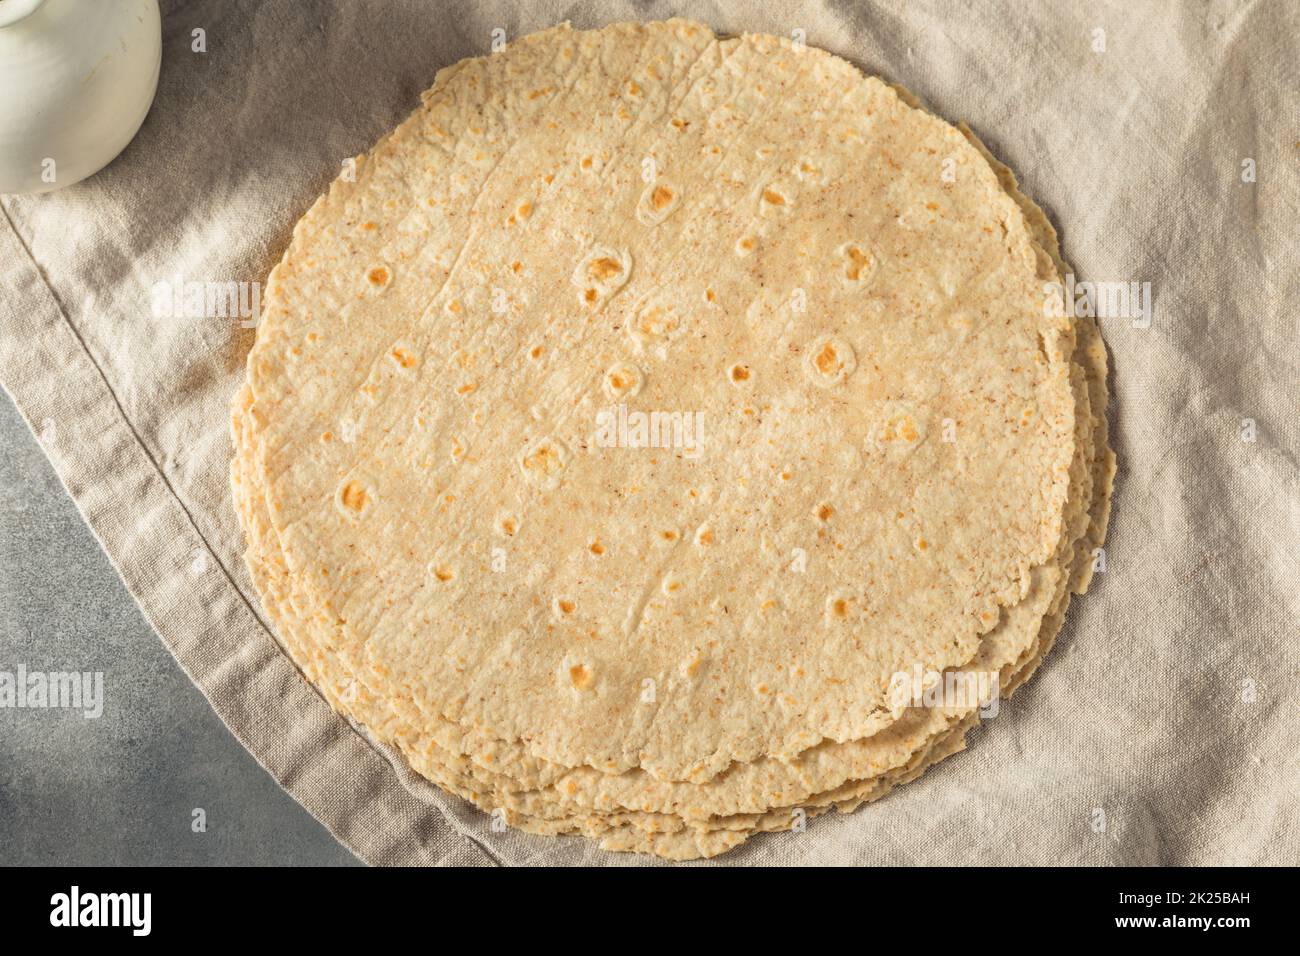 Homemade Whole Wheat Tortillas in a Stack Stock Photo